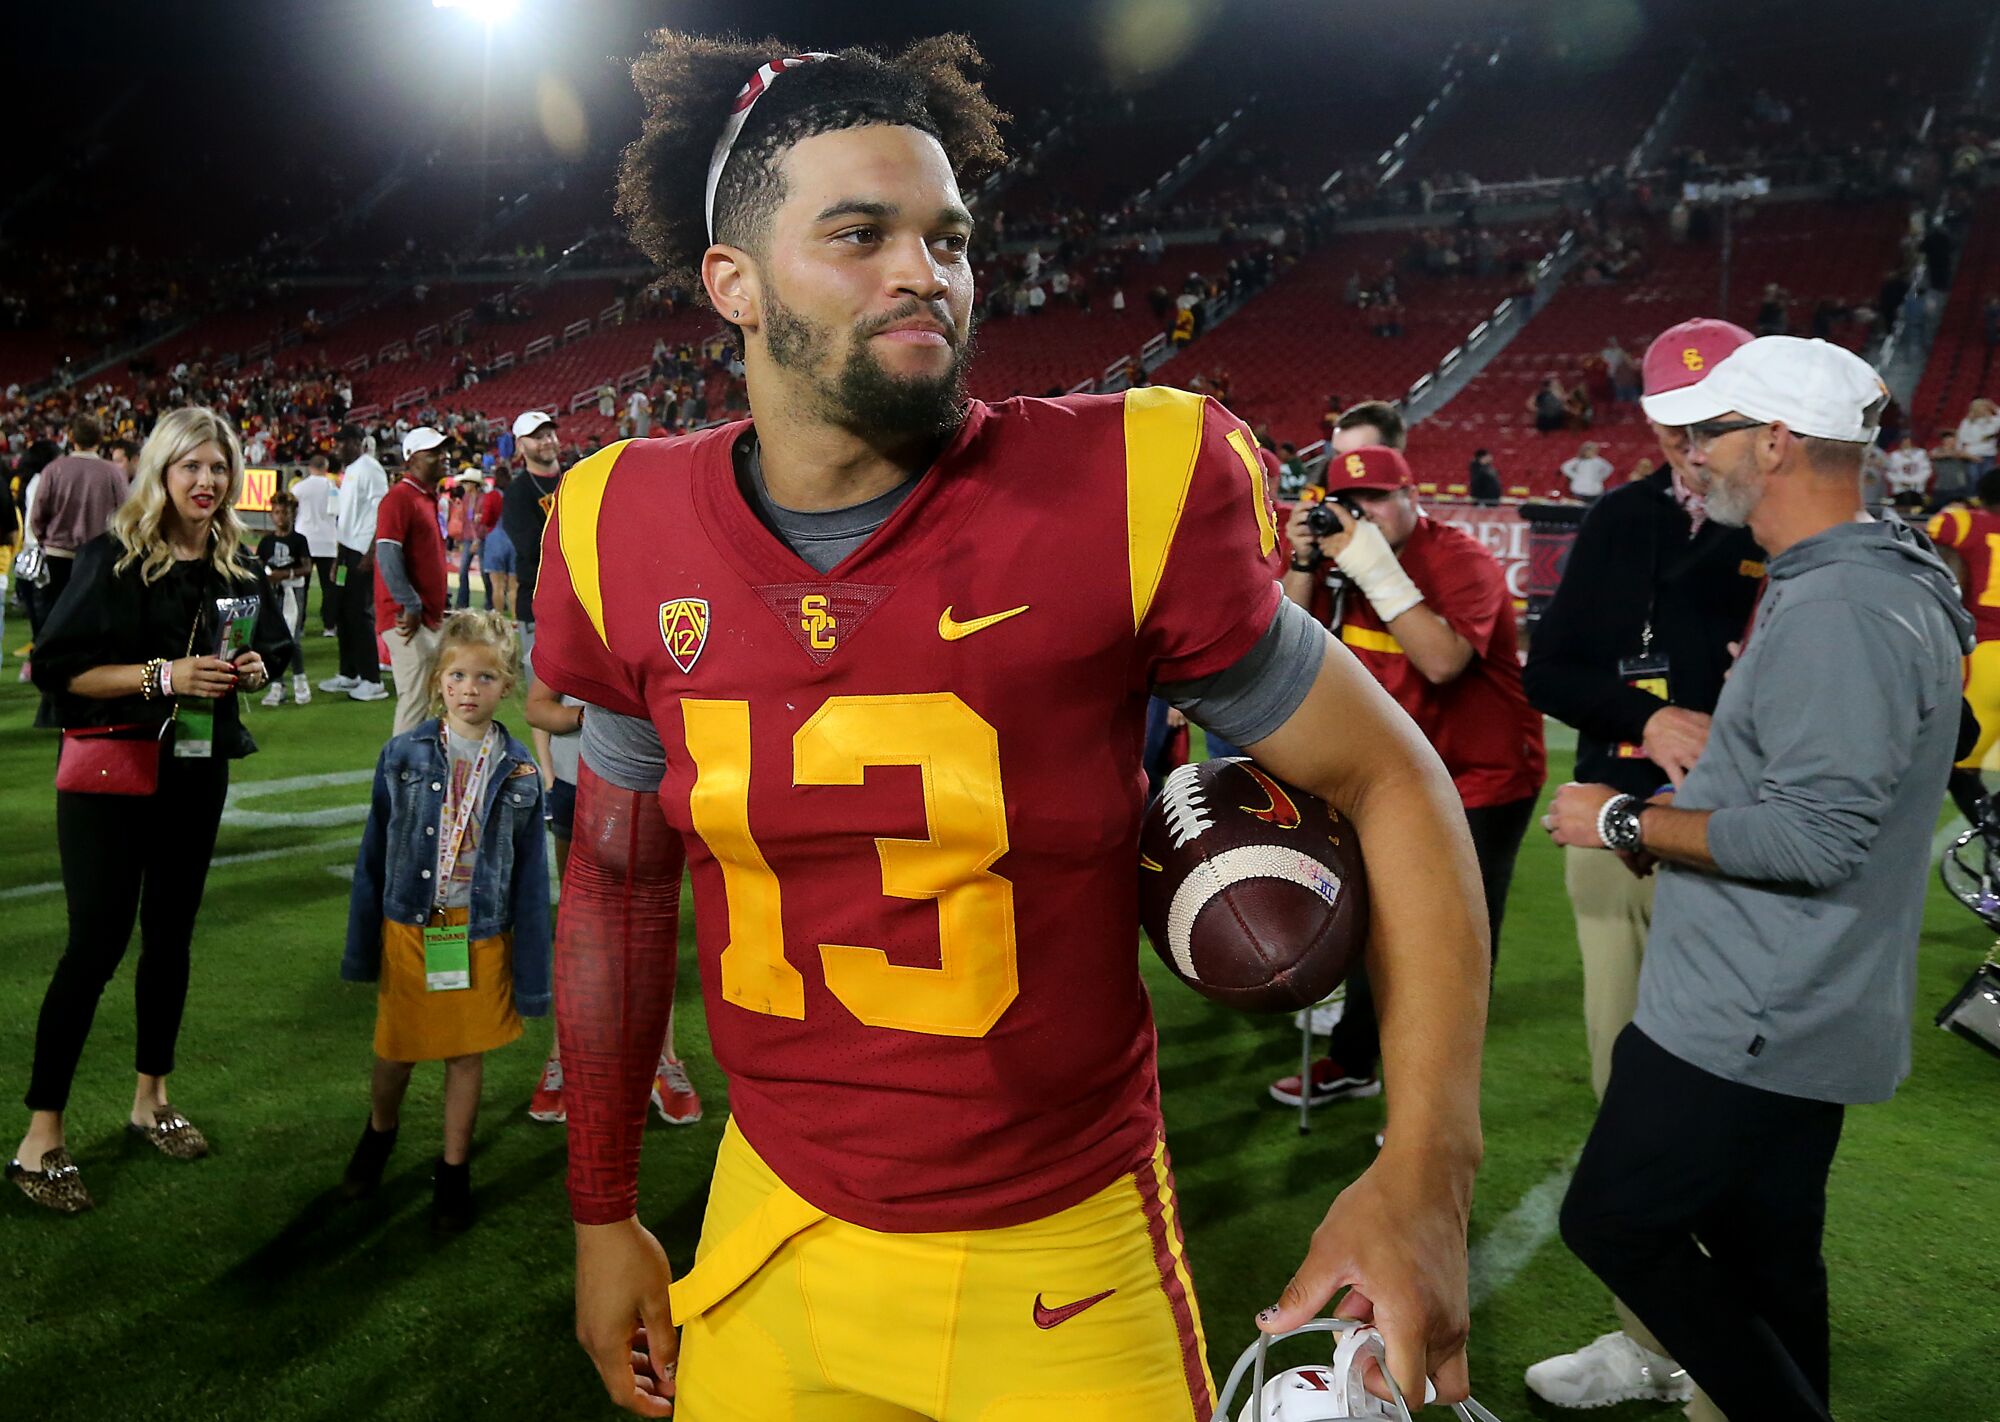 USC quarterback Caleb Williams walks off the field after a win over Arizona State at the Coliseum.